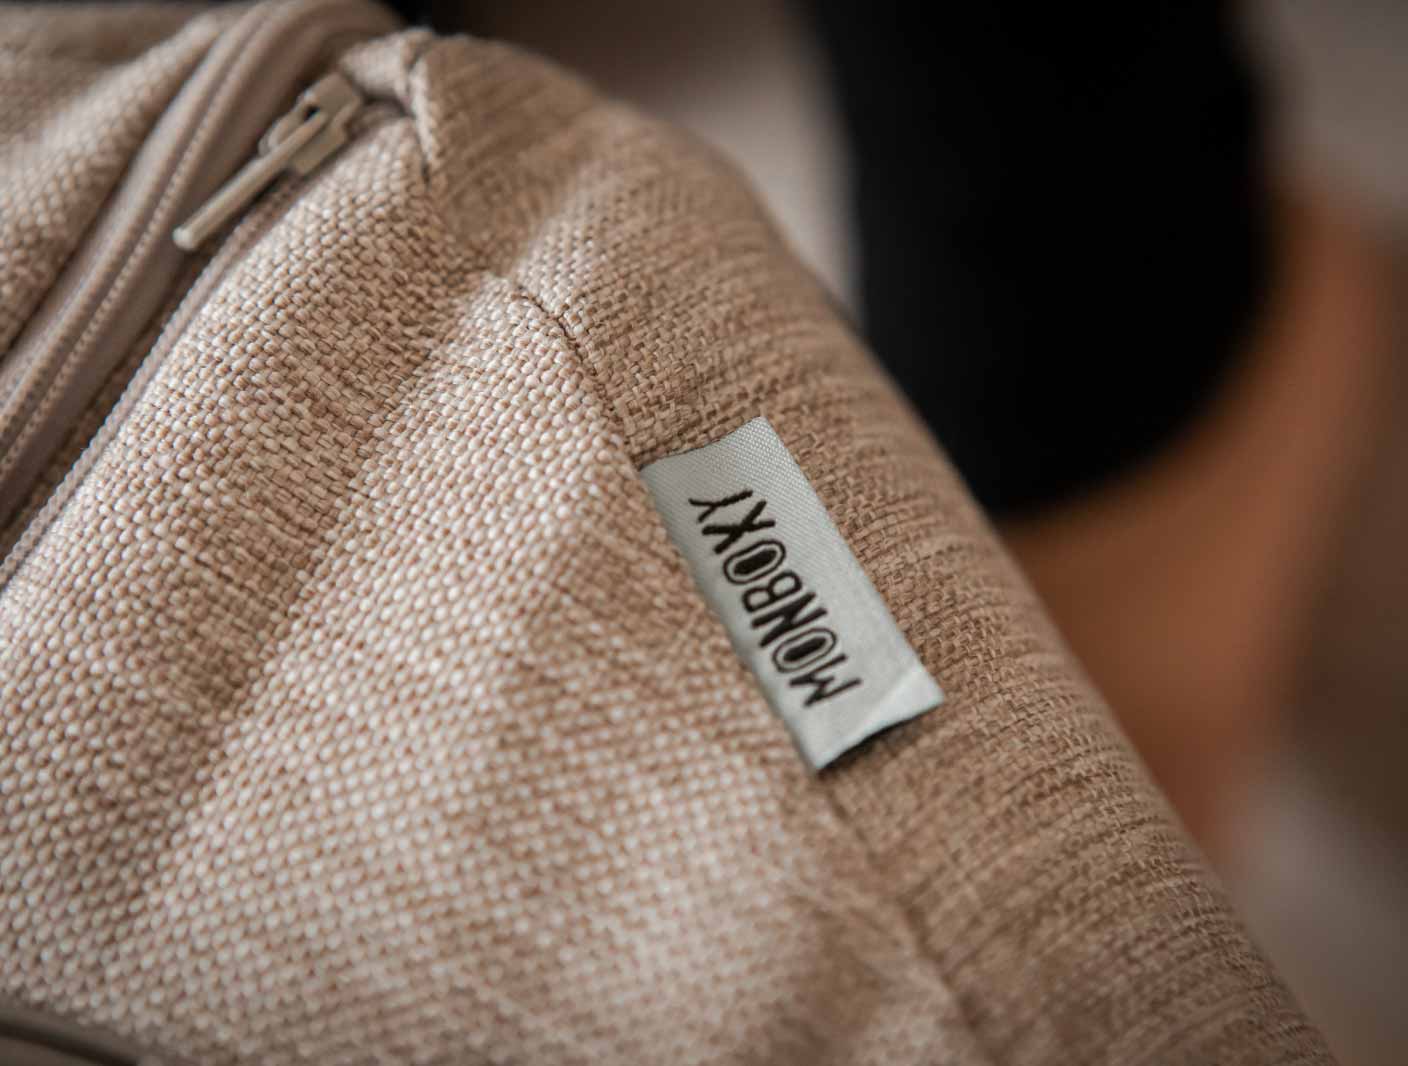 A close up of a bag with a label on it.